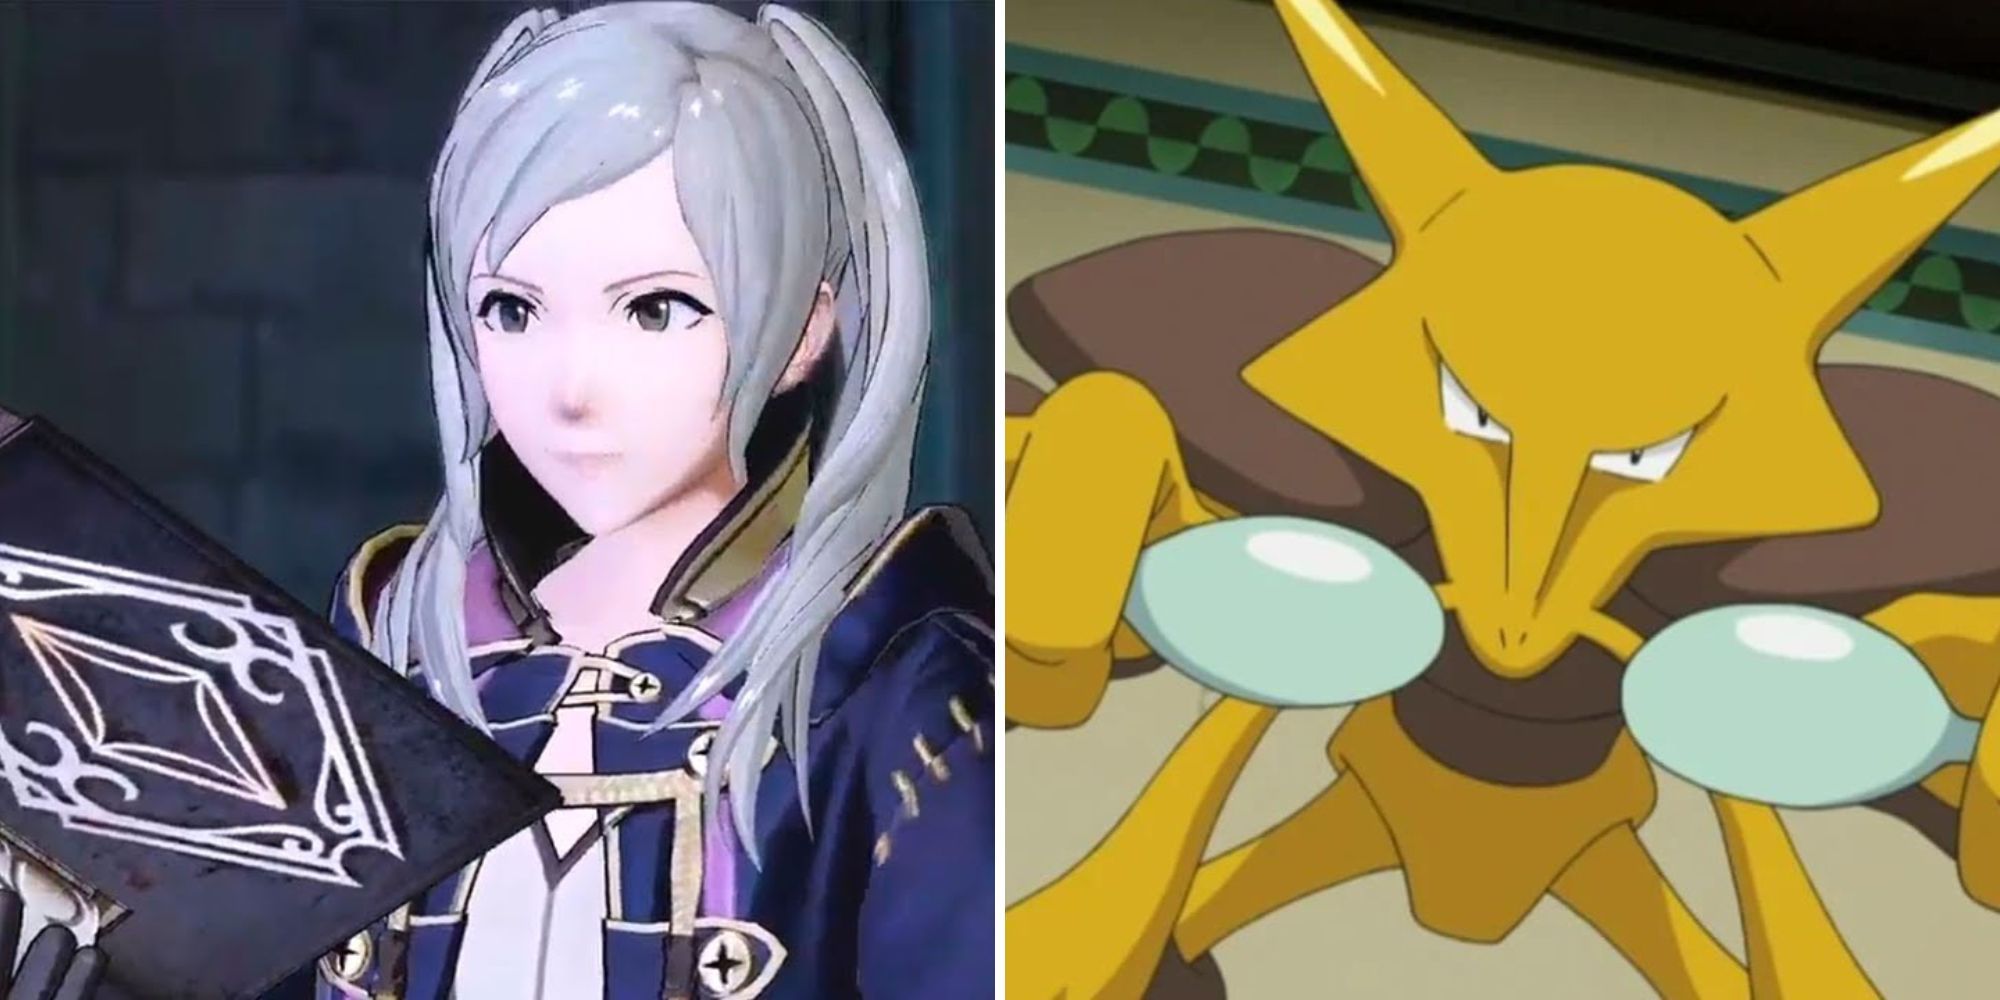 Robin holds a tome and Alakazam holds two spoons